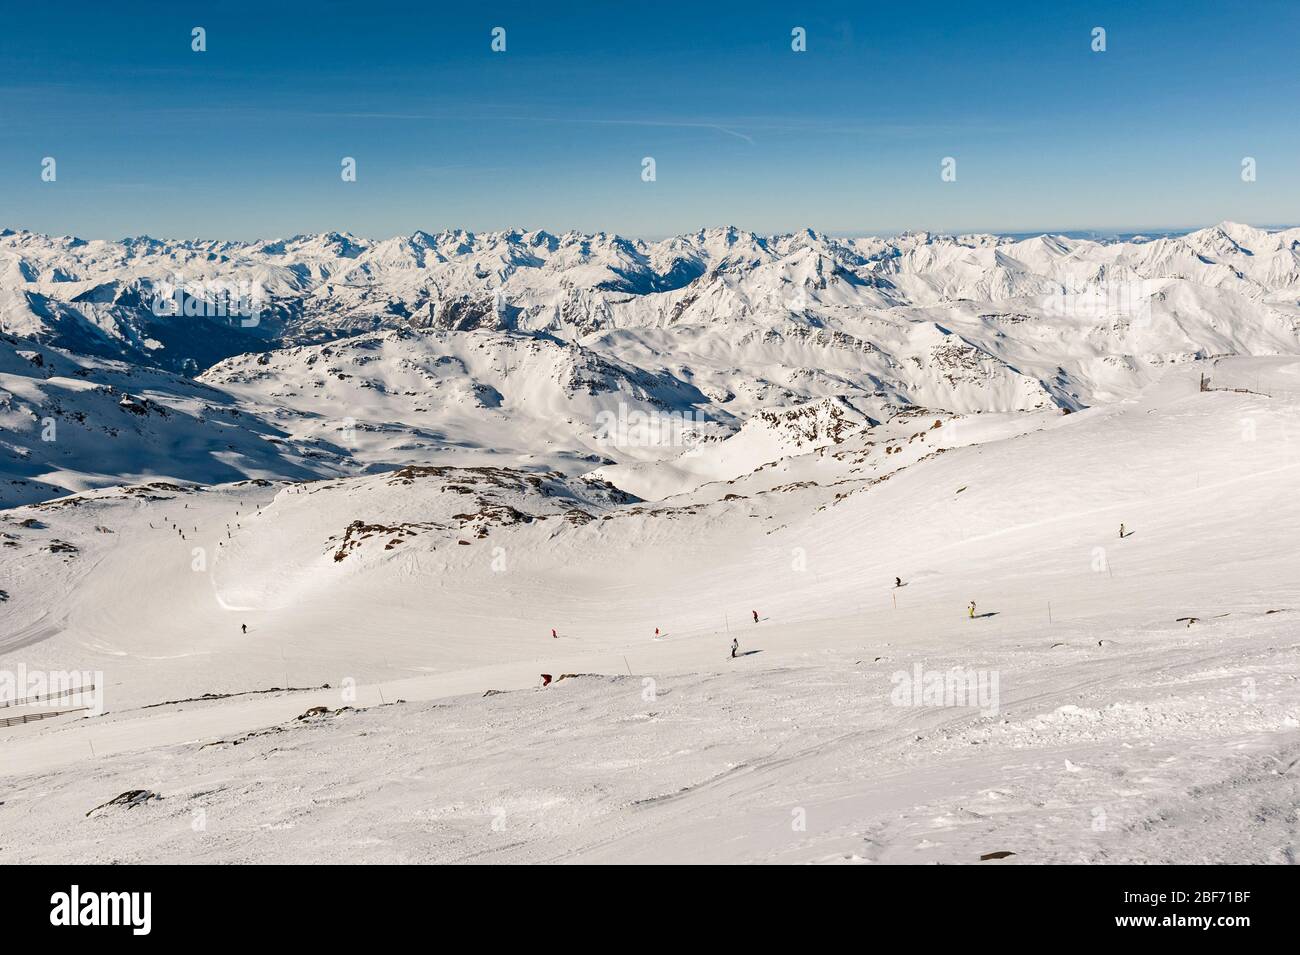 View down an alpine winter sport piste with skiers on mountain in ski resort Stock Photo